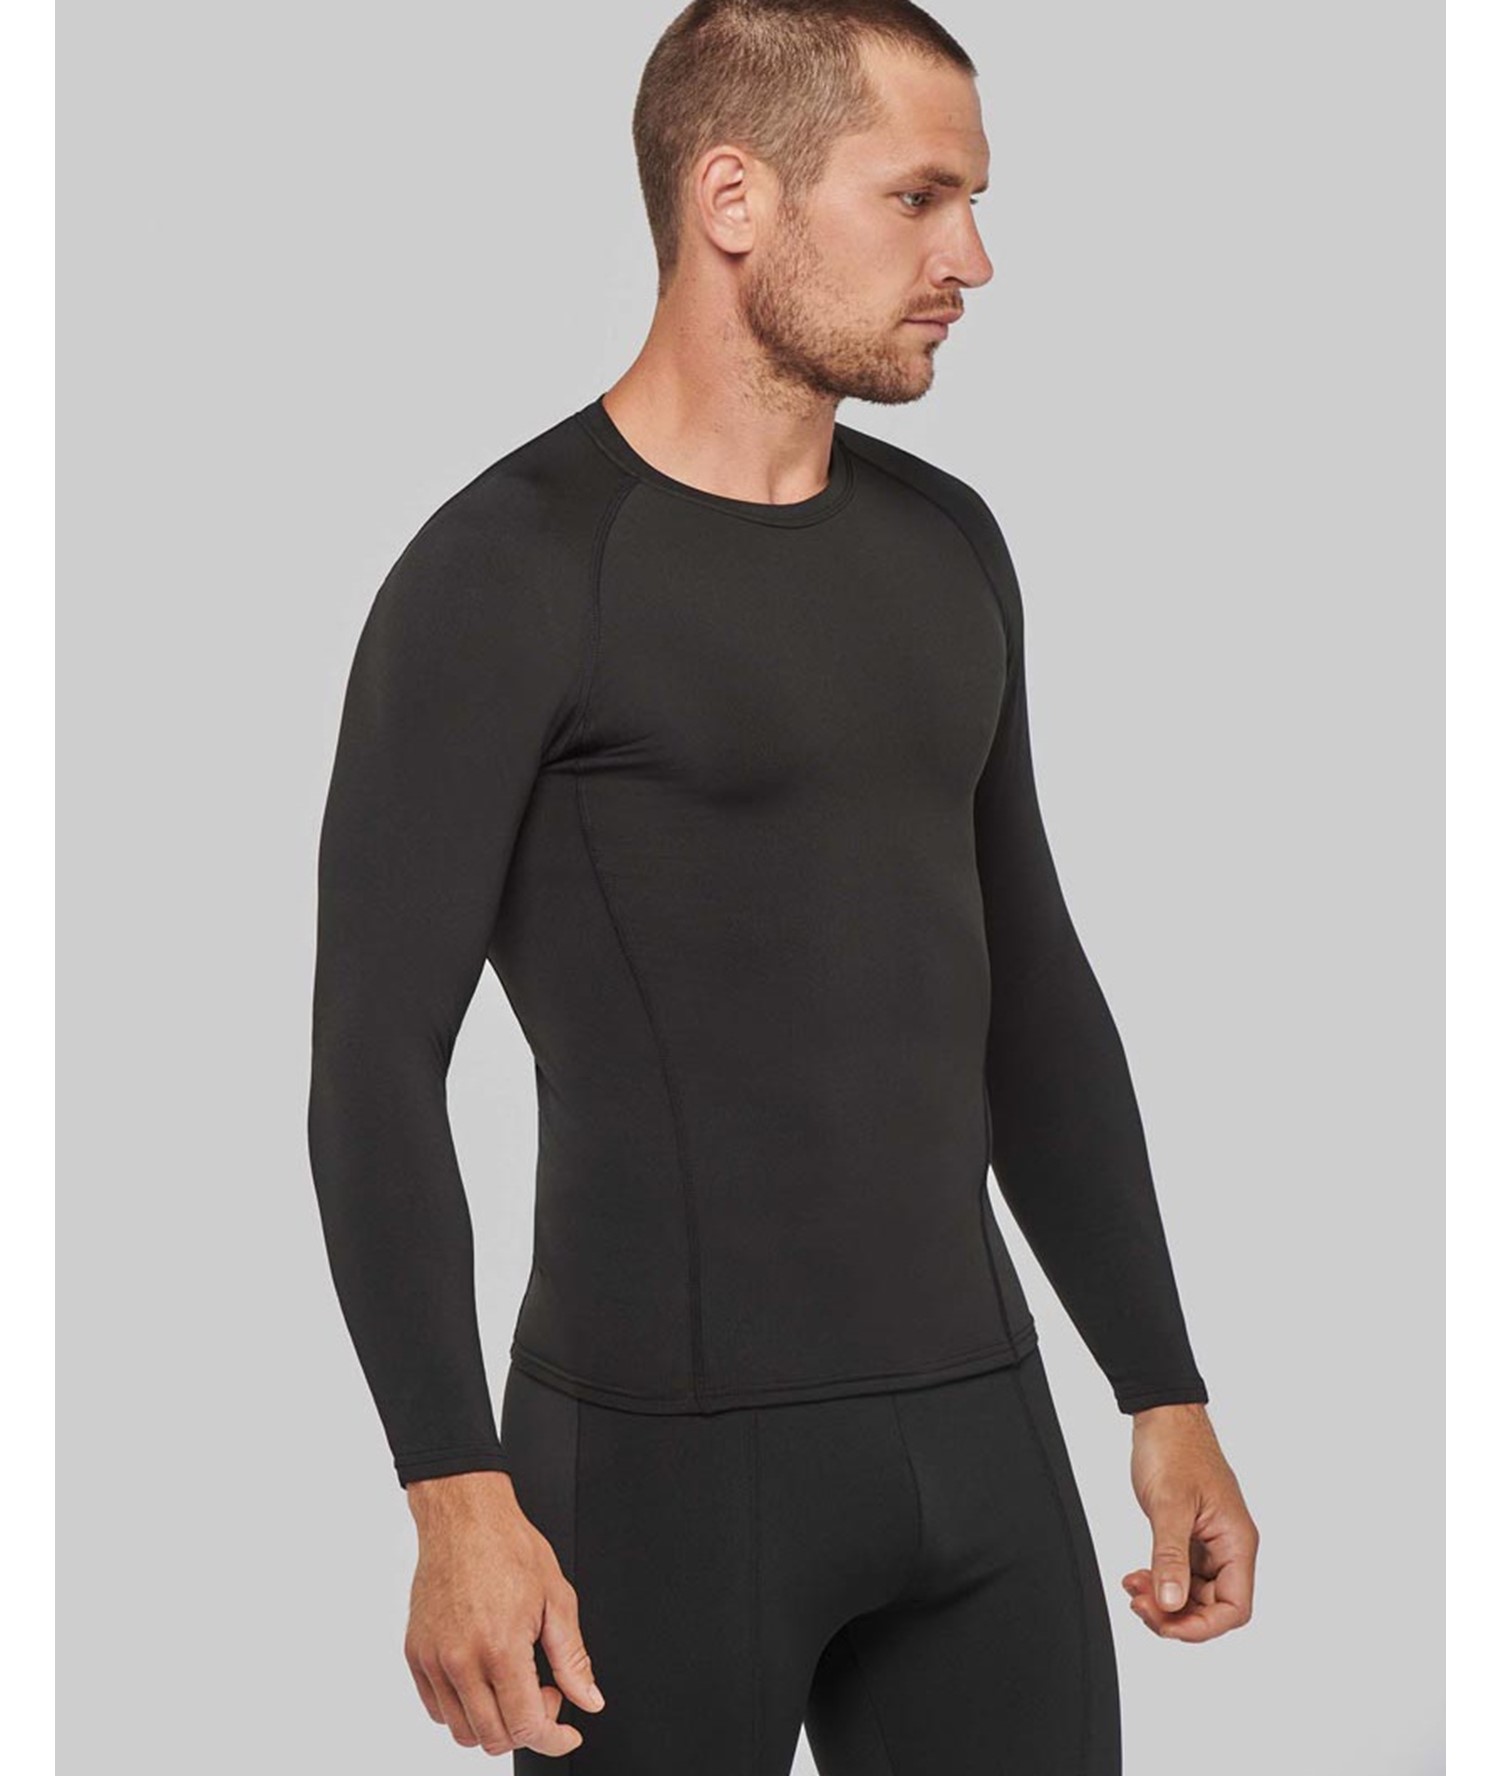 ADULTS' LONG-SLEEVED BASE LAYER SPORTS T-SHIRT